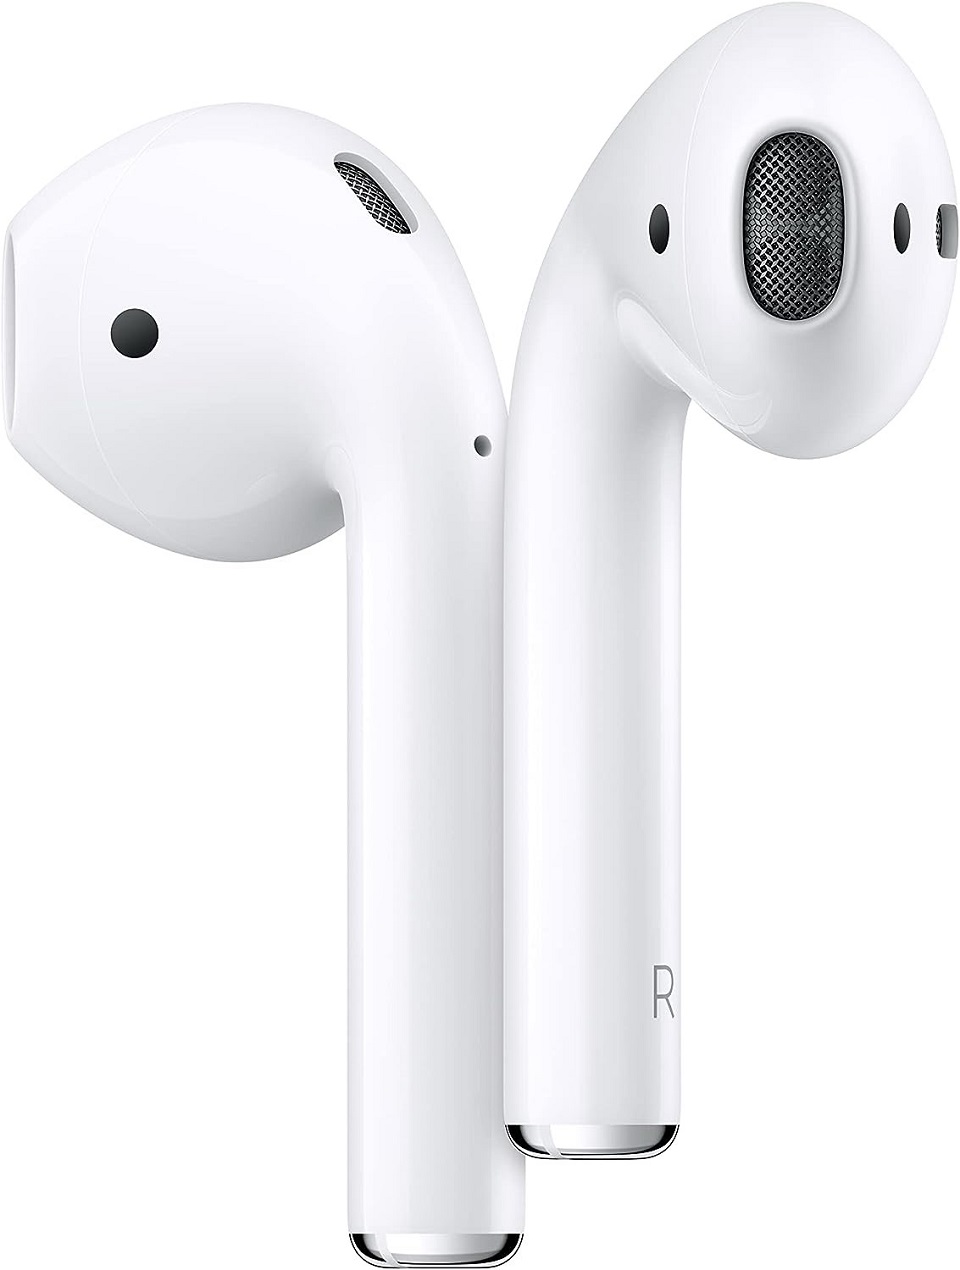 Apple AirPods (2nd Generation) cheap price